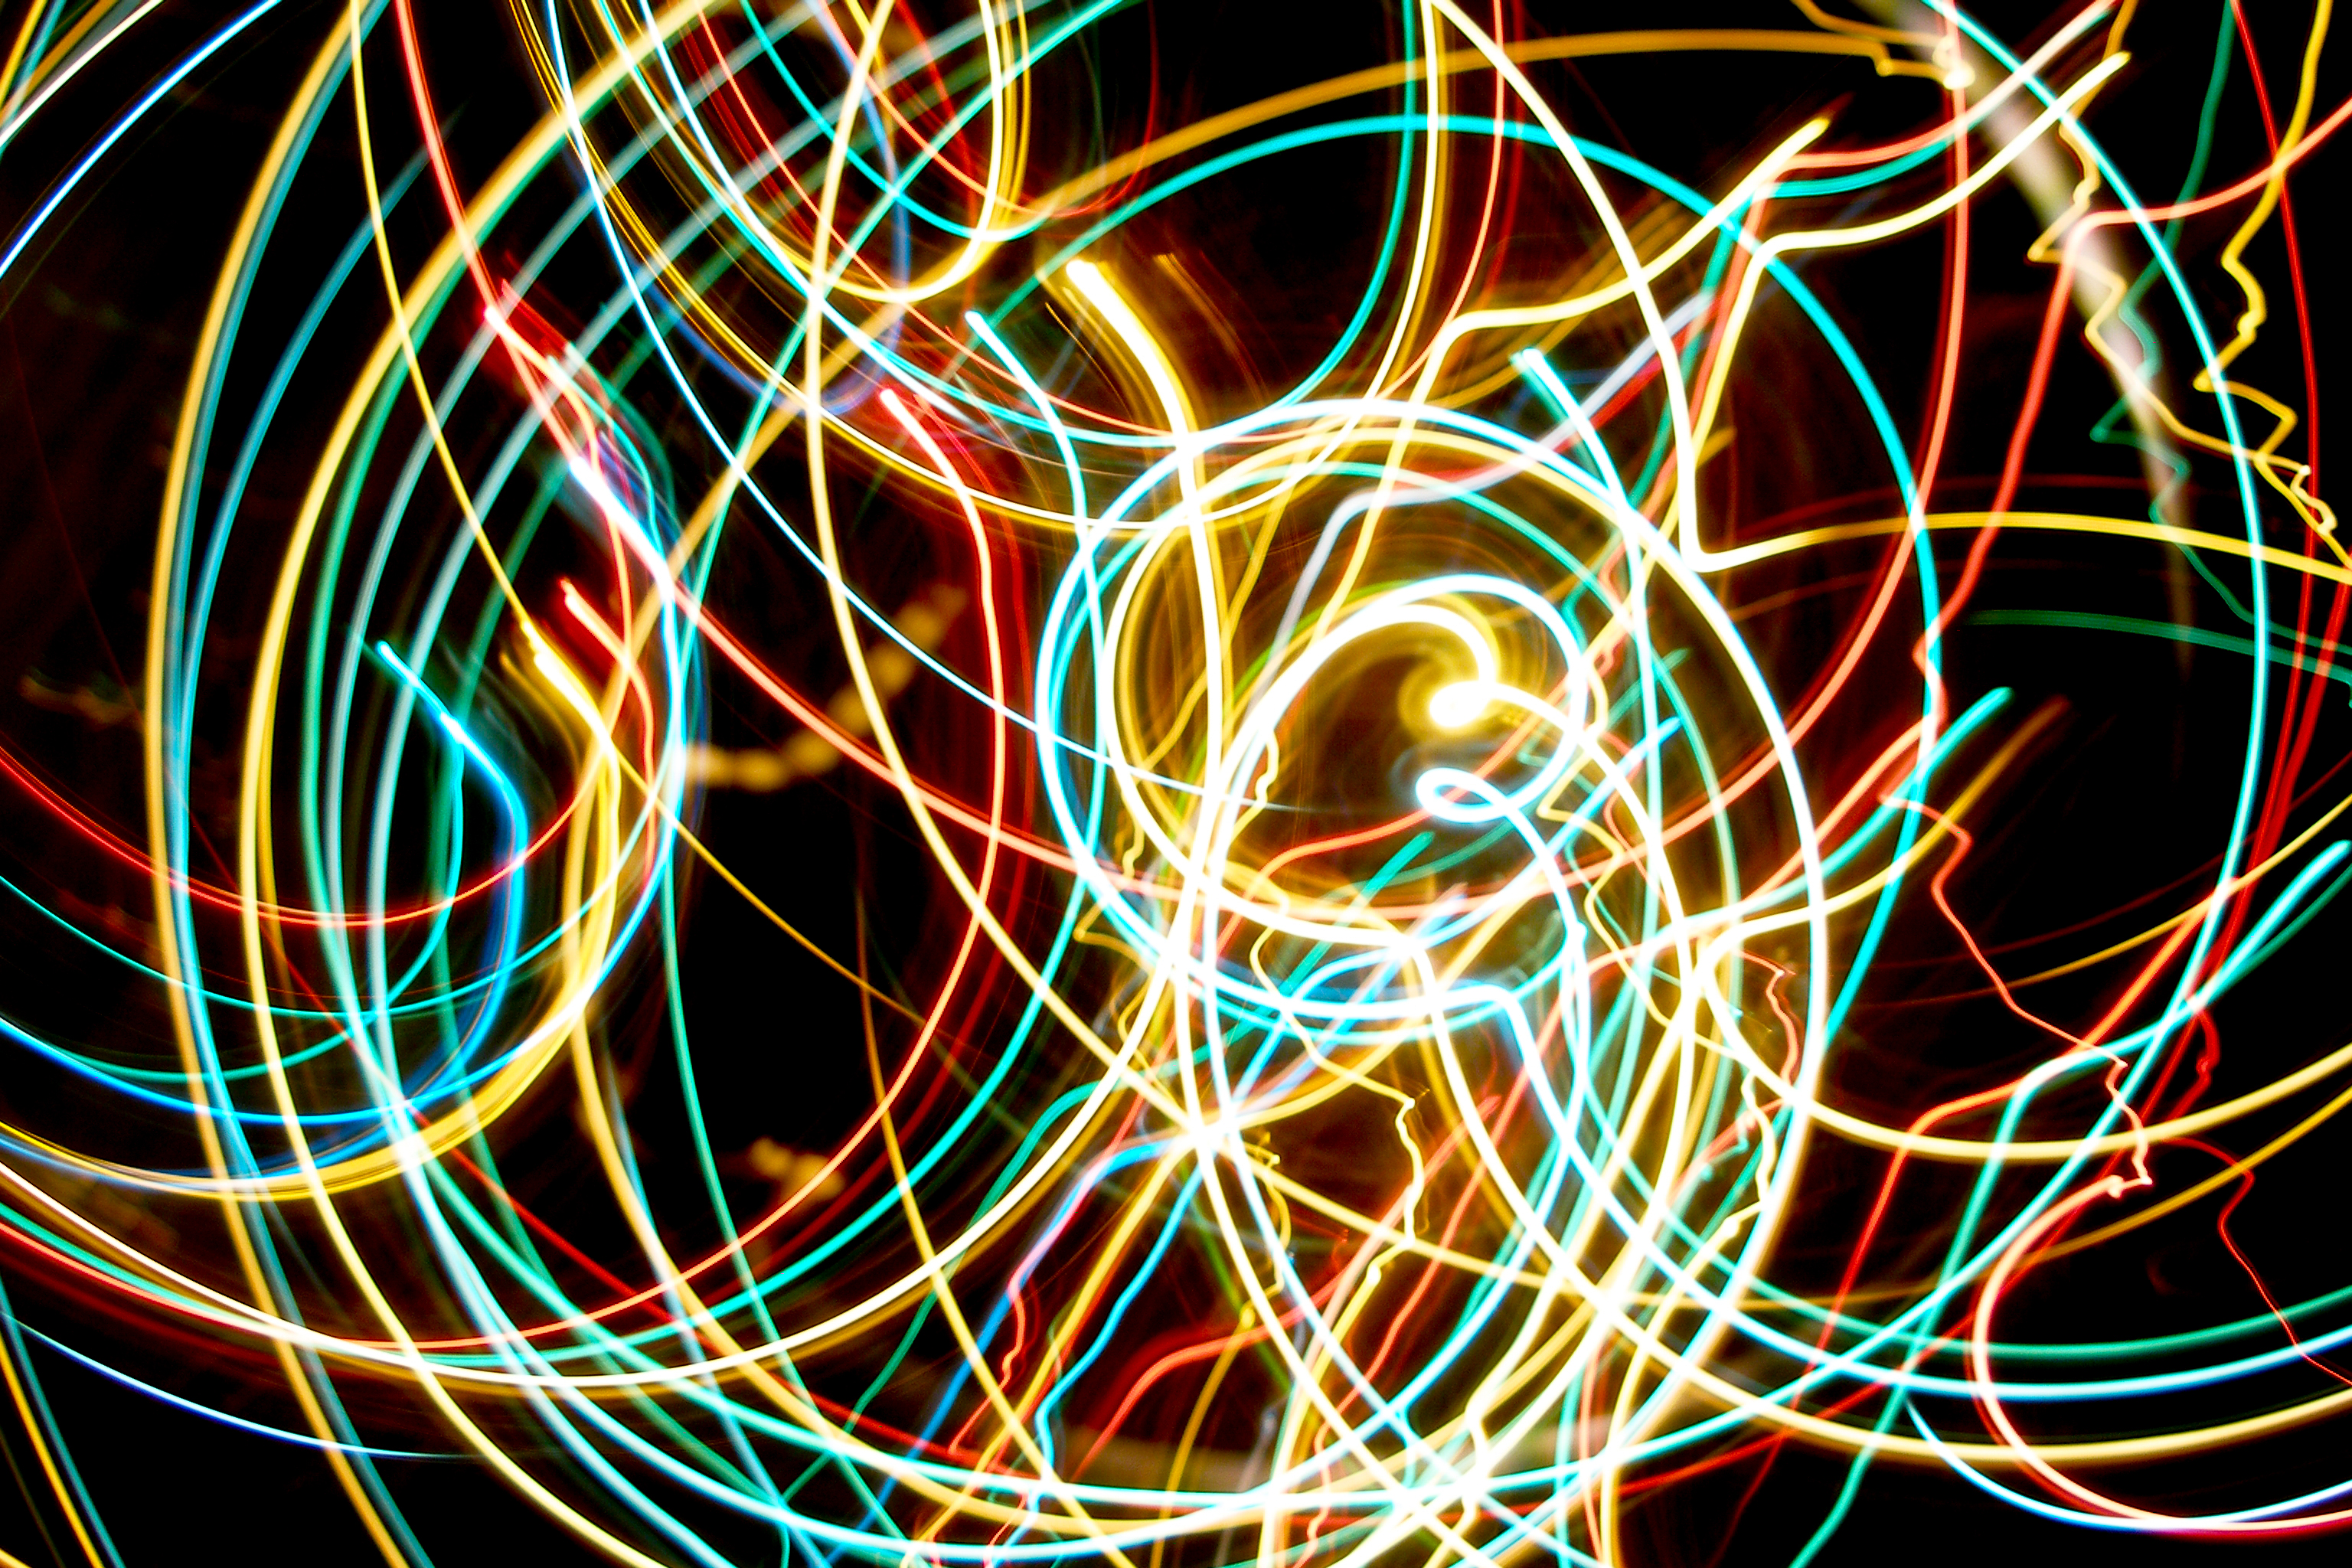 Camera Toss Kinetic Artistic Photography Swirl Abstract Light Colors Colorful Light Trails 3072x2048